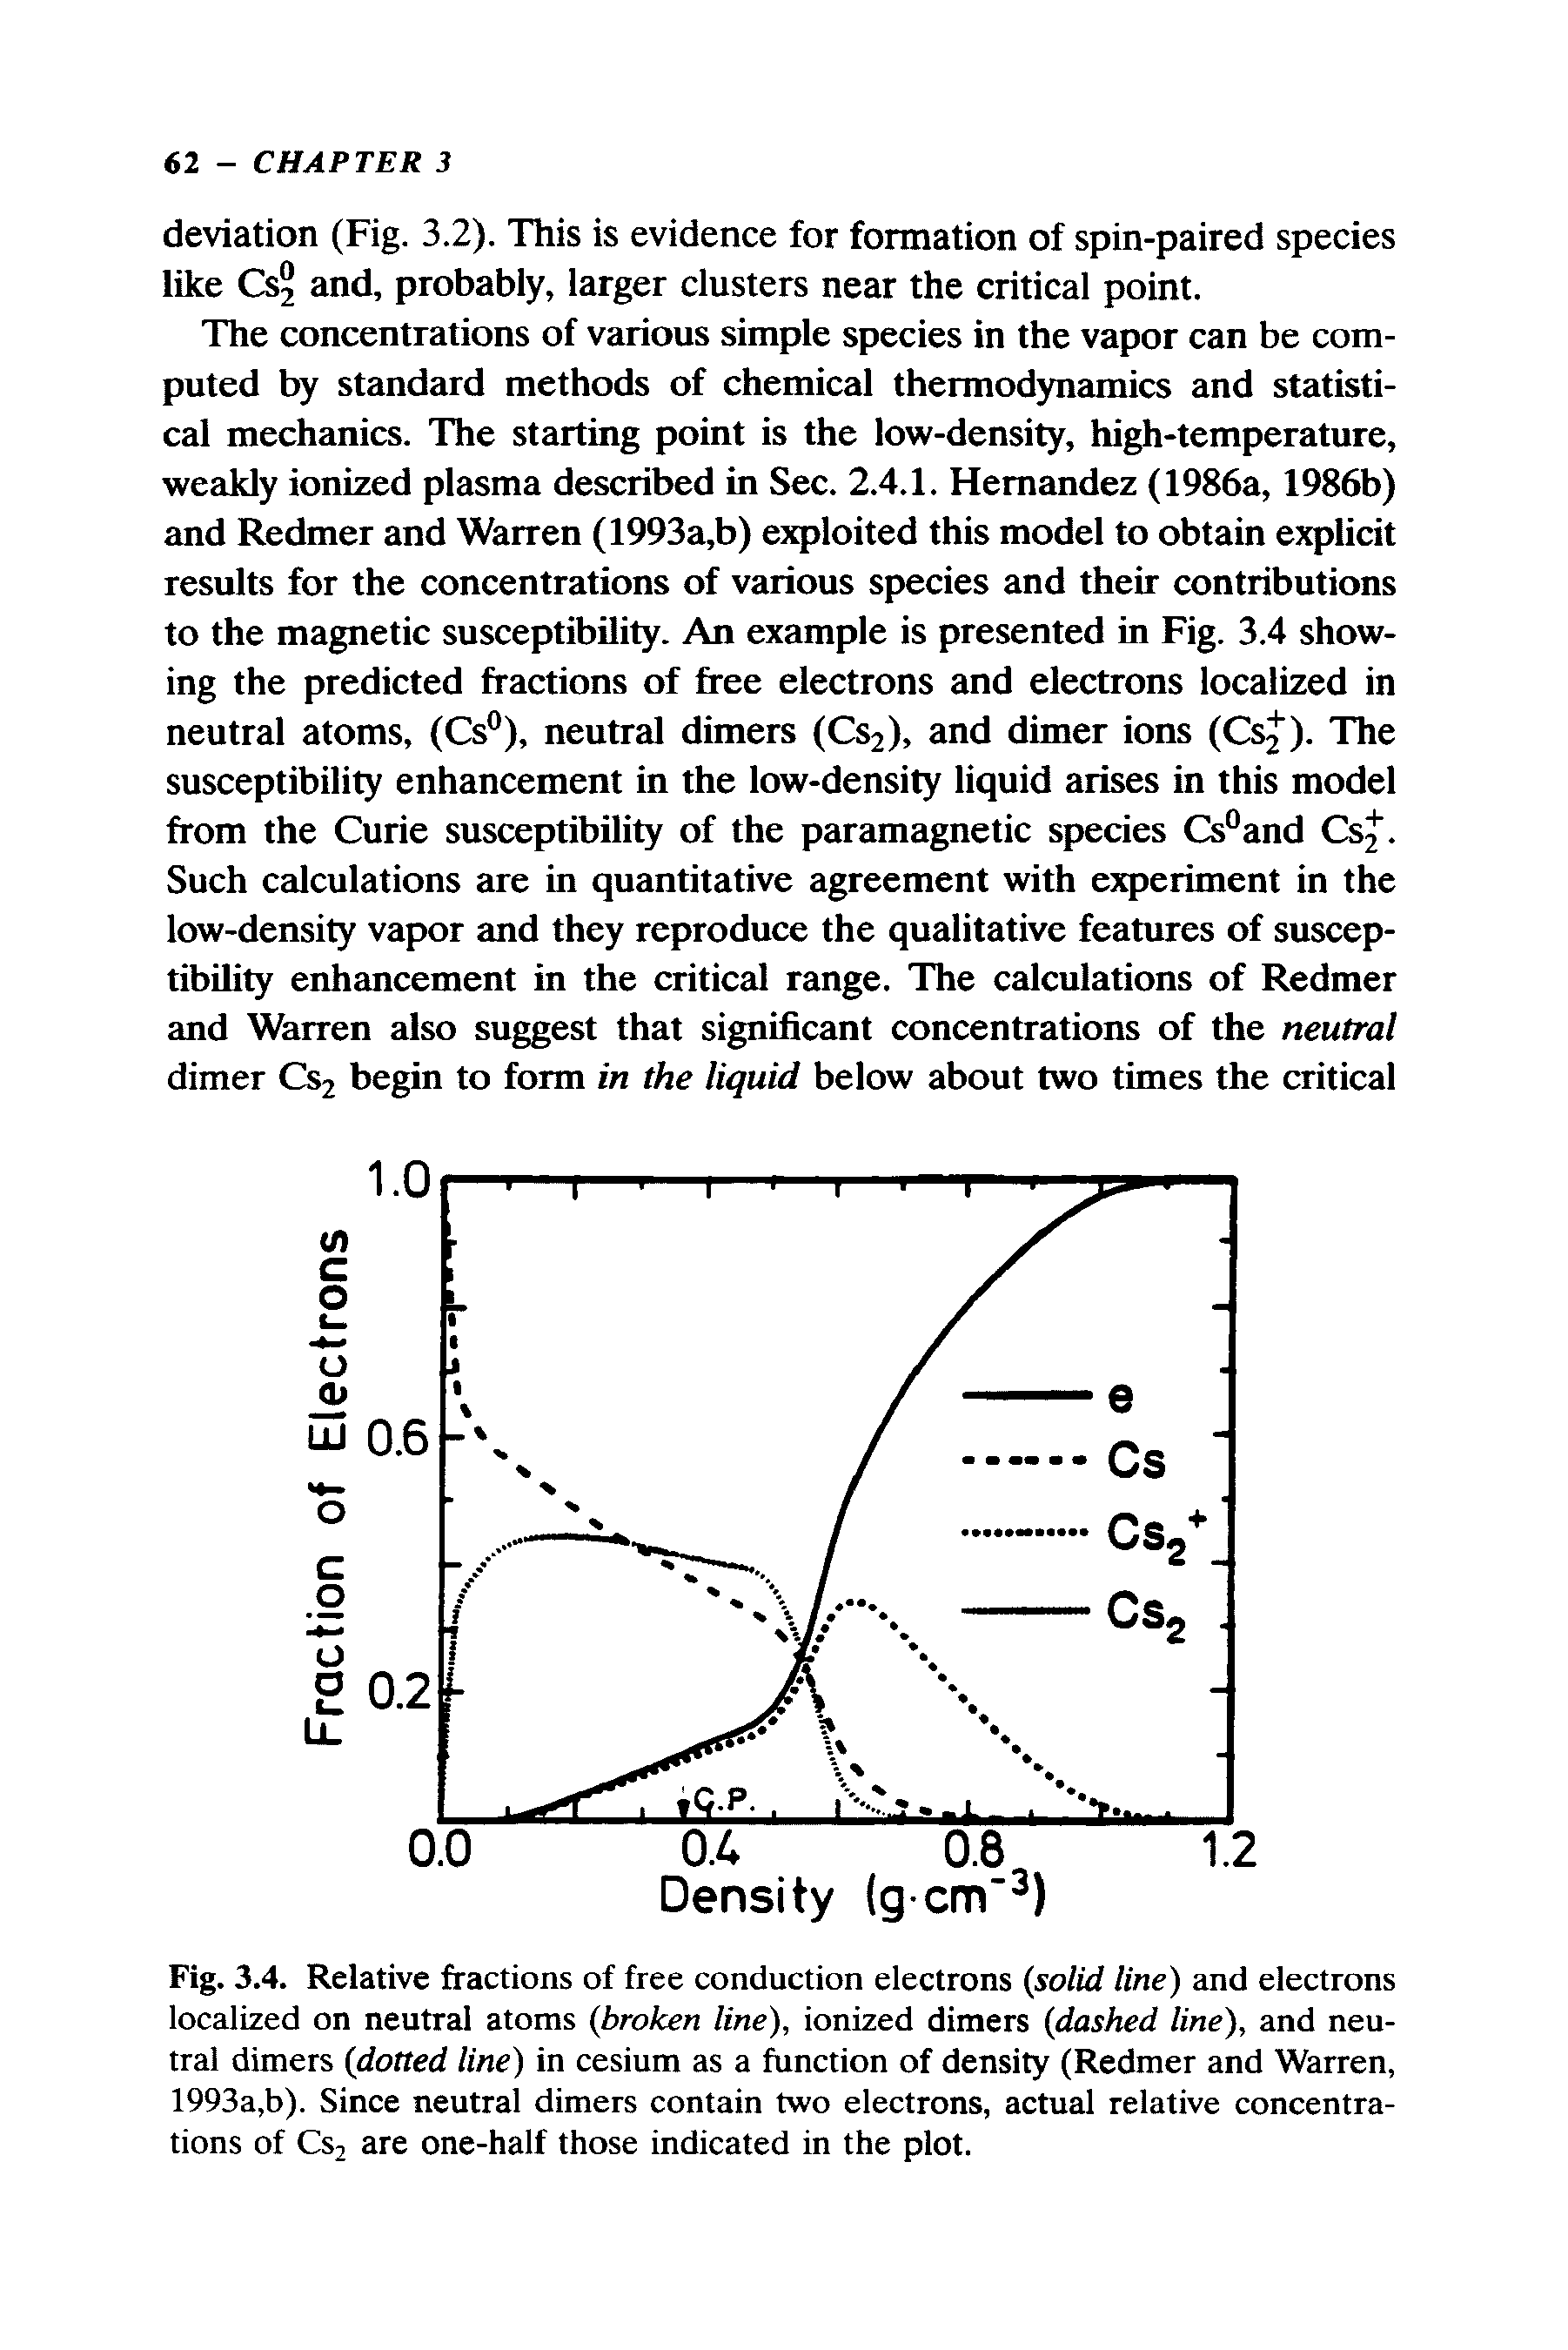 Fig. 3.4. Relative fractions of free conduction electrons solid line) and electrons localized on neutral atoms broken line), ionized dimers dashed line), and neutral dimers dotted line) in cesium as a function of density (Redmer and Warren, 1993a,b). Since neutral dimers contain two electrons, actual relative concentrations of Csj are one-half those indicated in the plot.